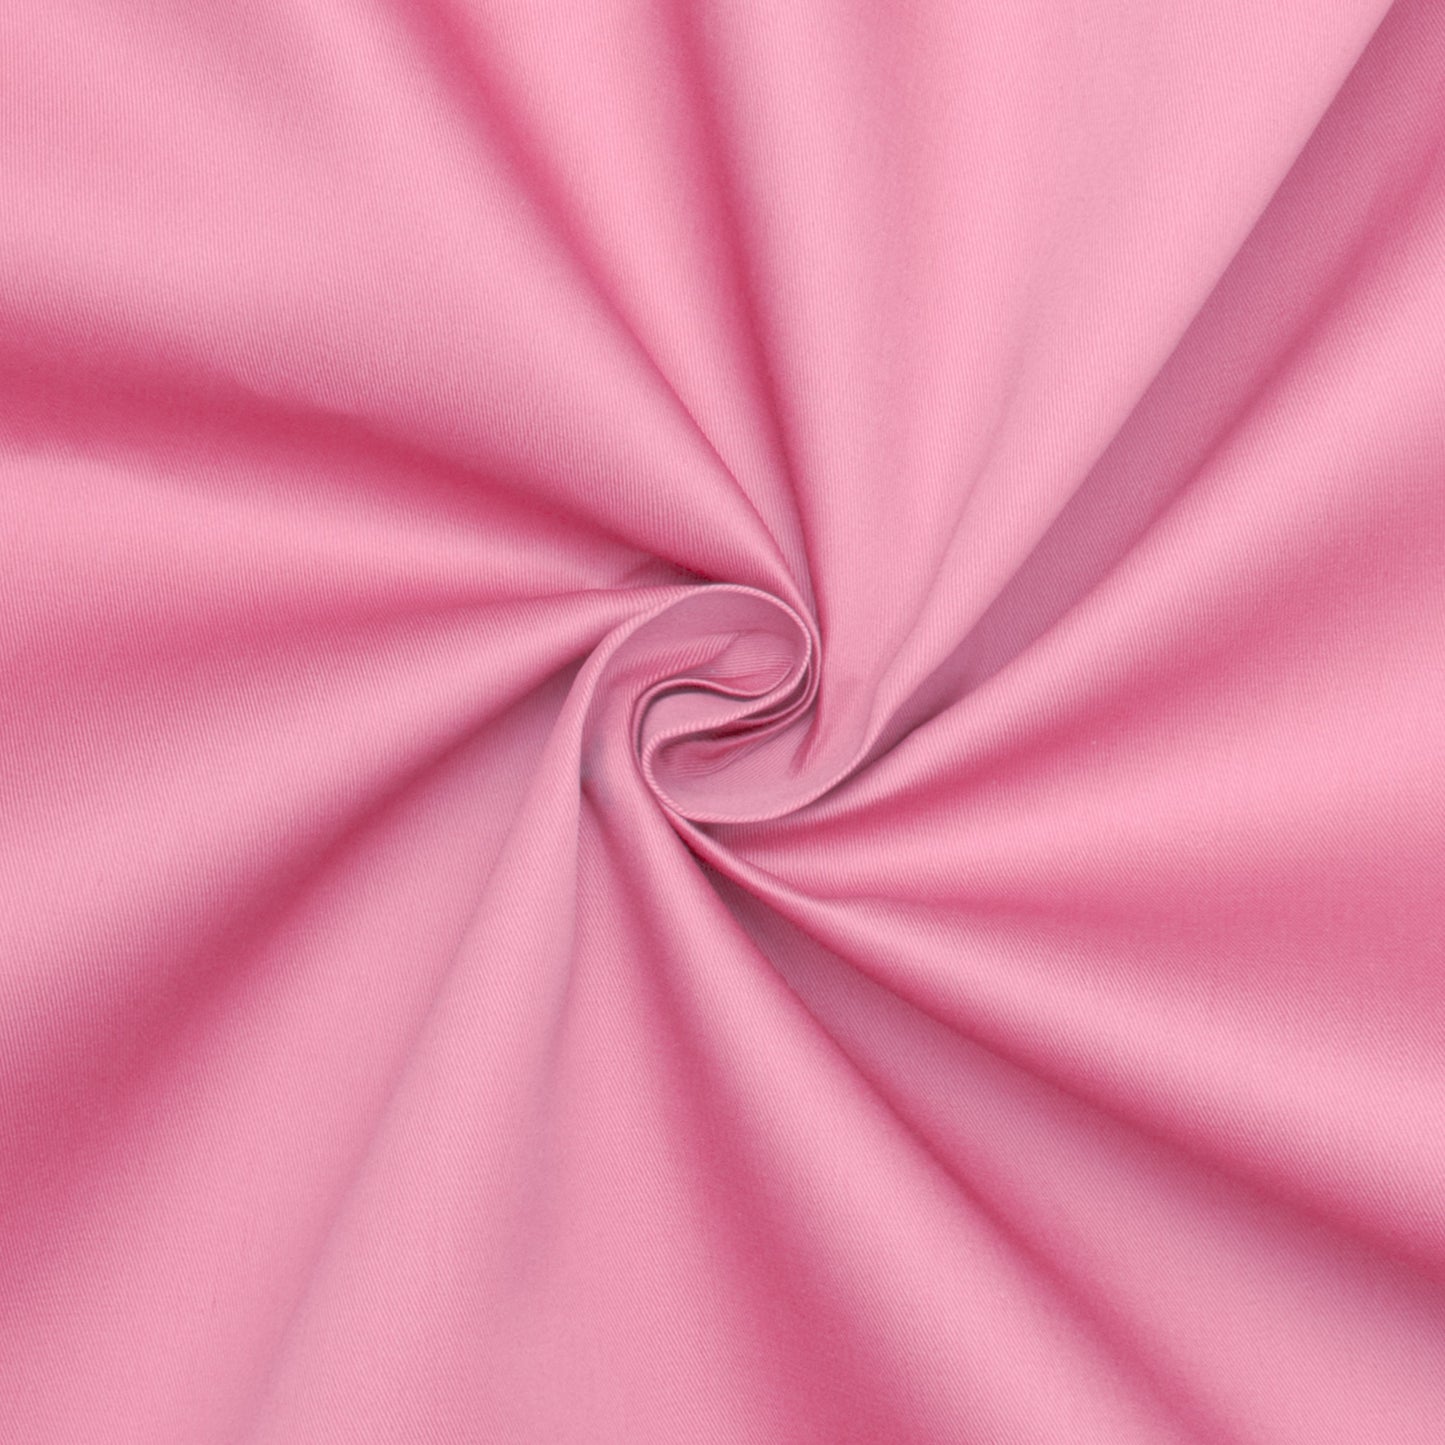 Twill Poly Cotton Baby Pink #27 150cm